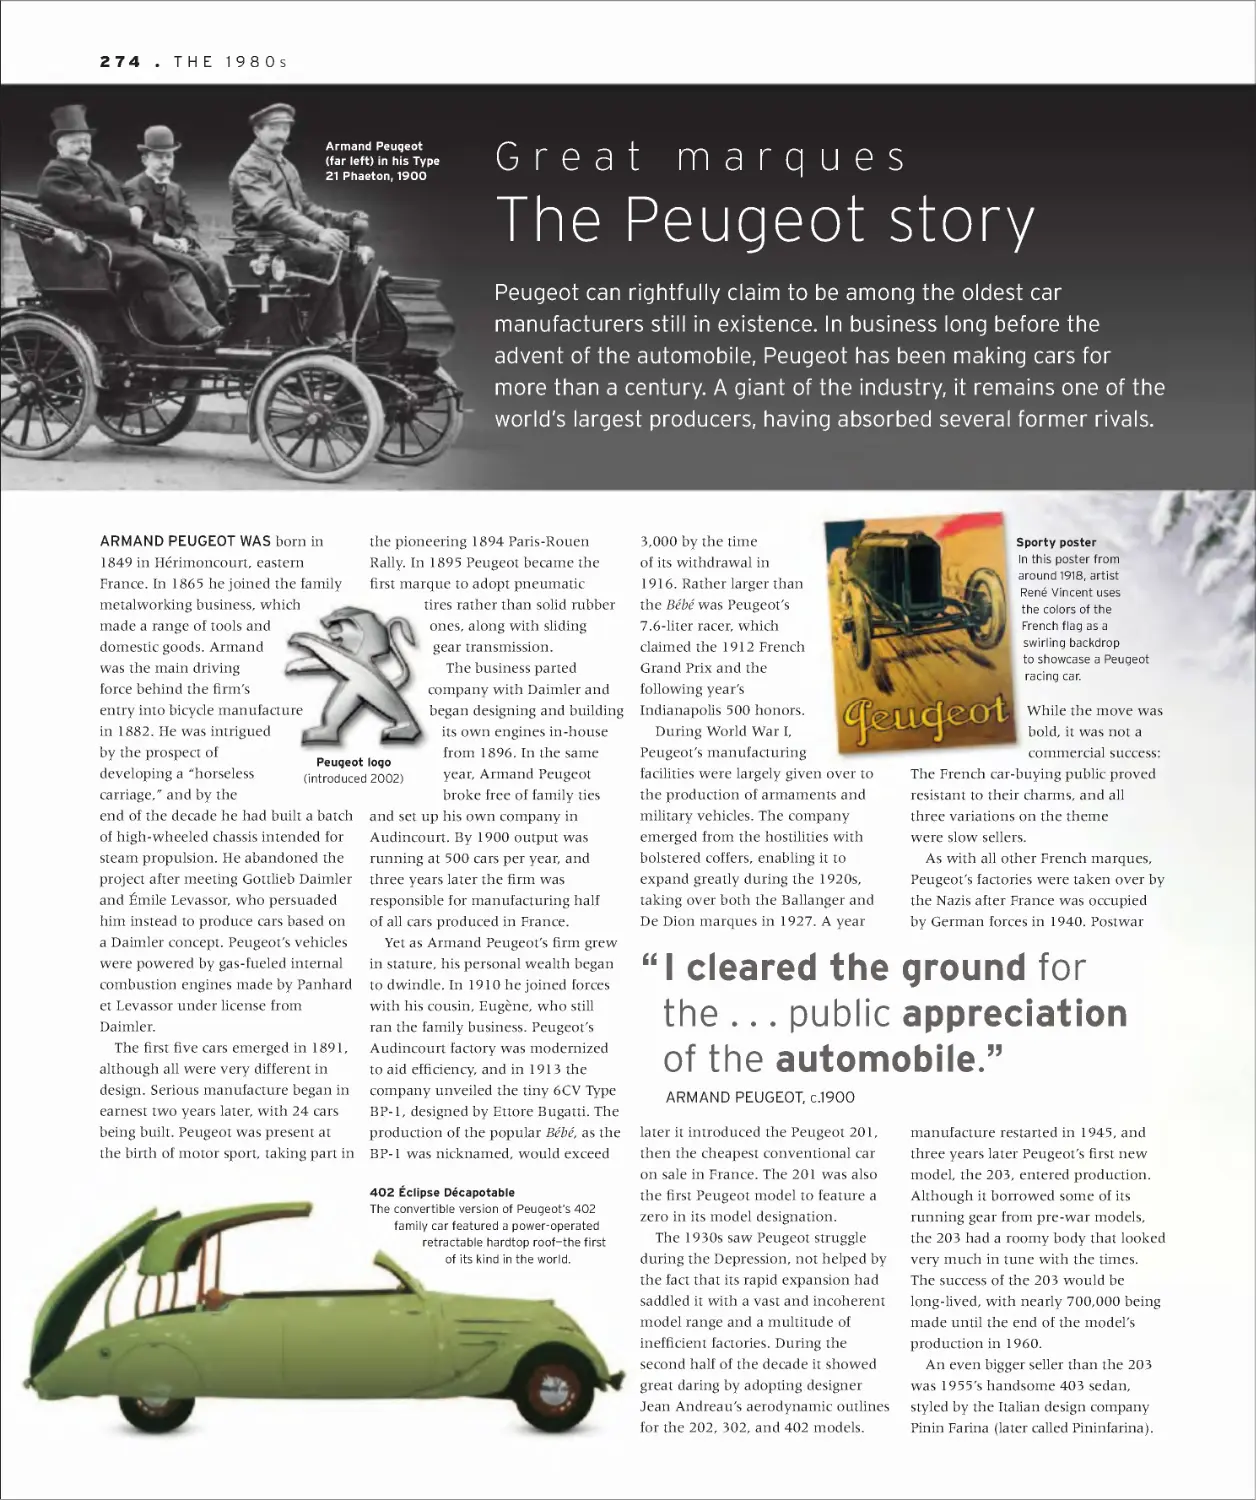 Great marques: The Peugeot story 274